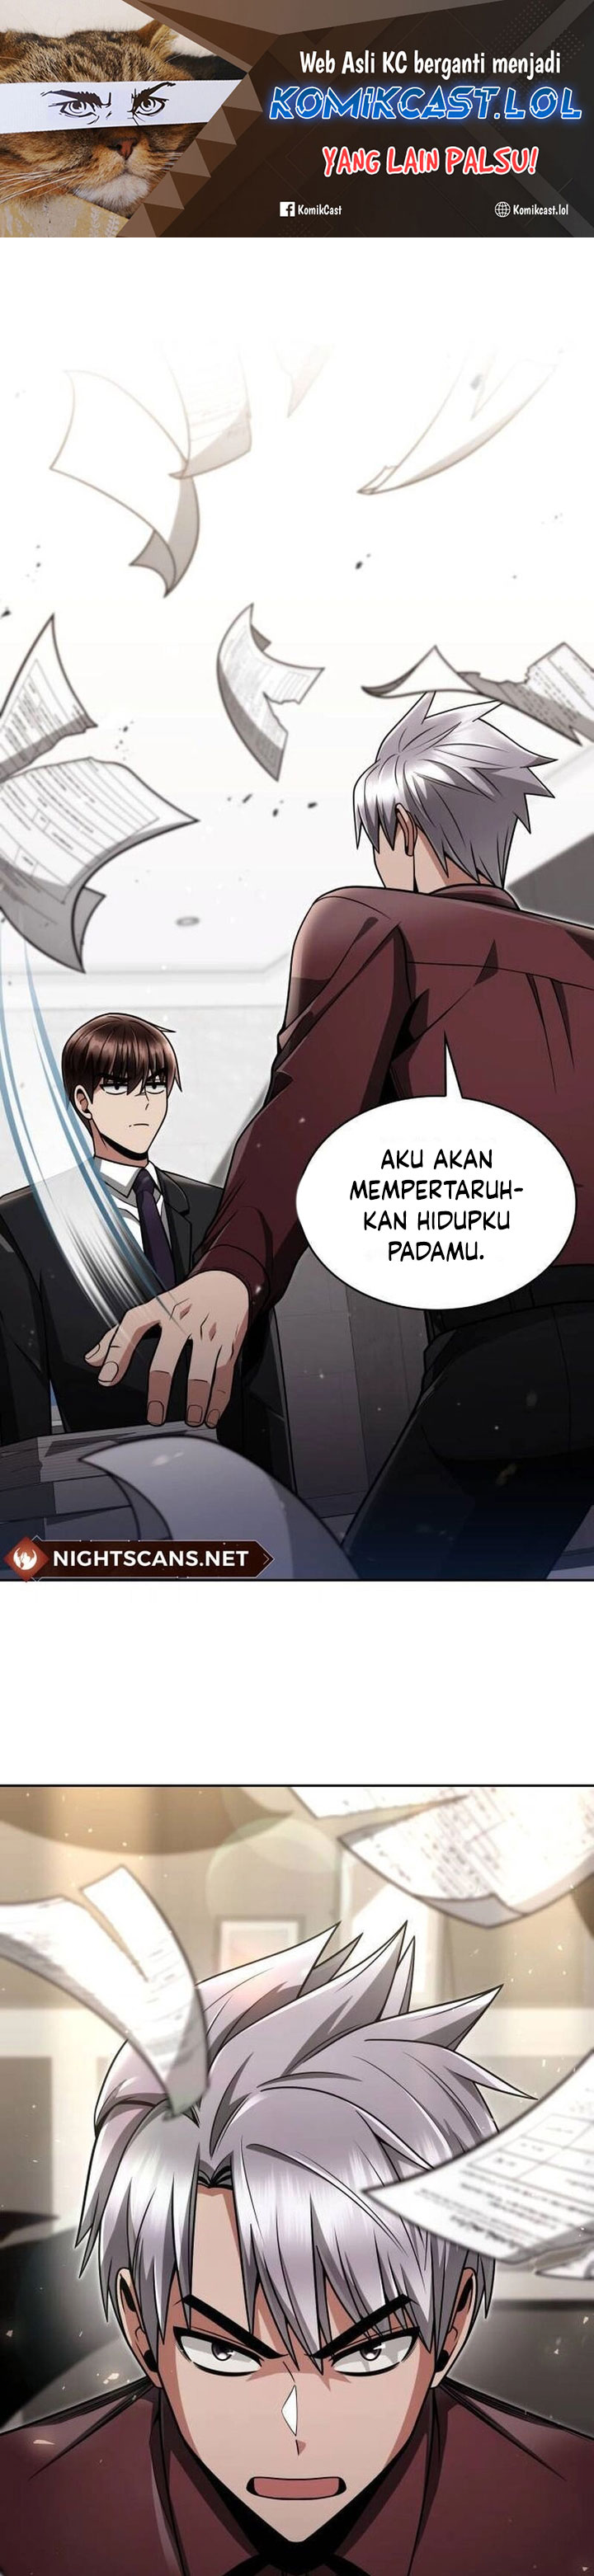 Dilarang COPAS - situs resmi www.mangacanblog.com - Komik clever cleaning life of the returned genius hunter 063 - chapter 63 64 Indonesia clever cleaning life of the returned genius hunter 063 - chapter 63 Terbaru 1|Baca Manga Komik Indonesia|Mangacan